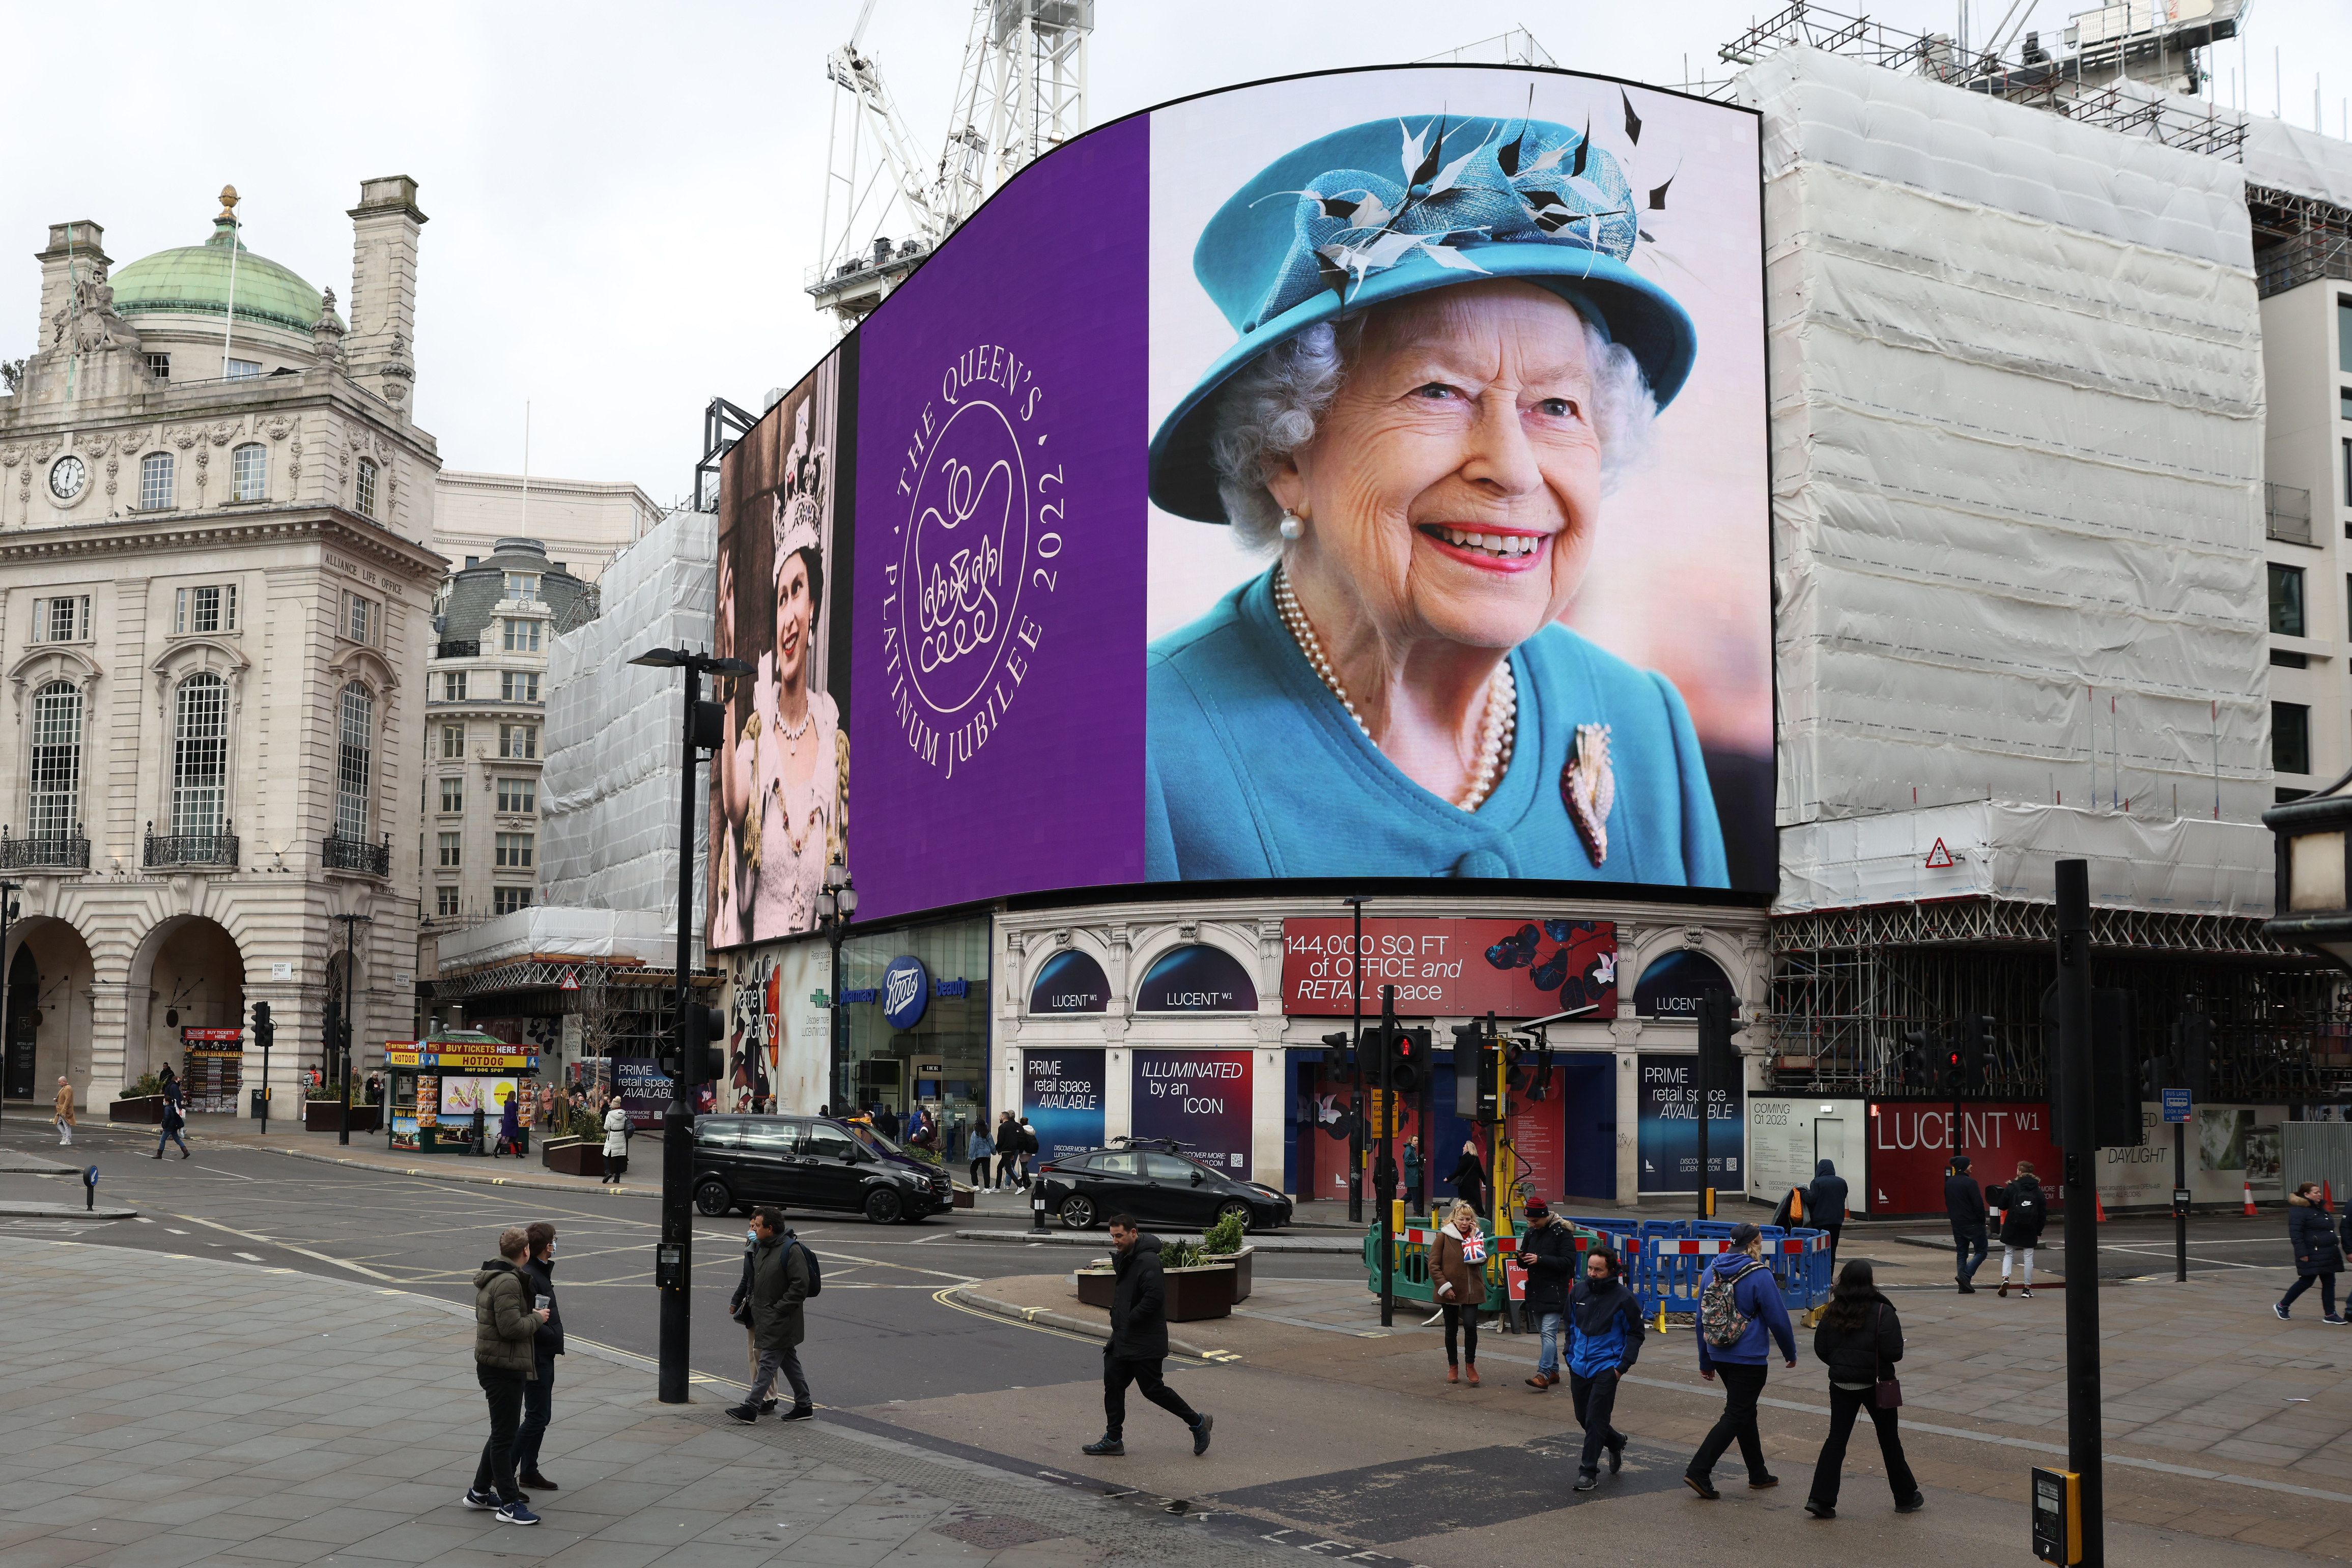 A portrait of Queen Elizabeth II is displayed on the large screen at Piccadilly Circus